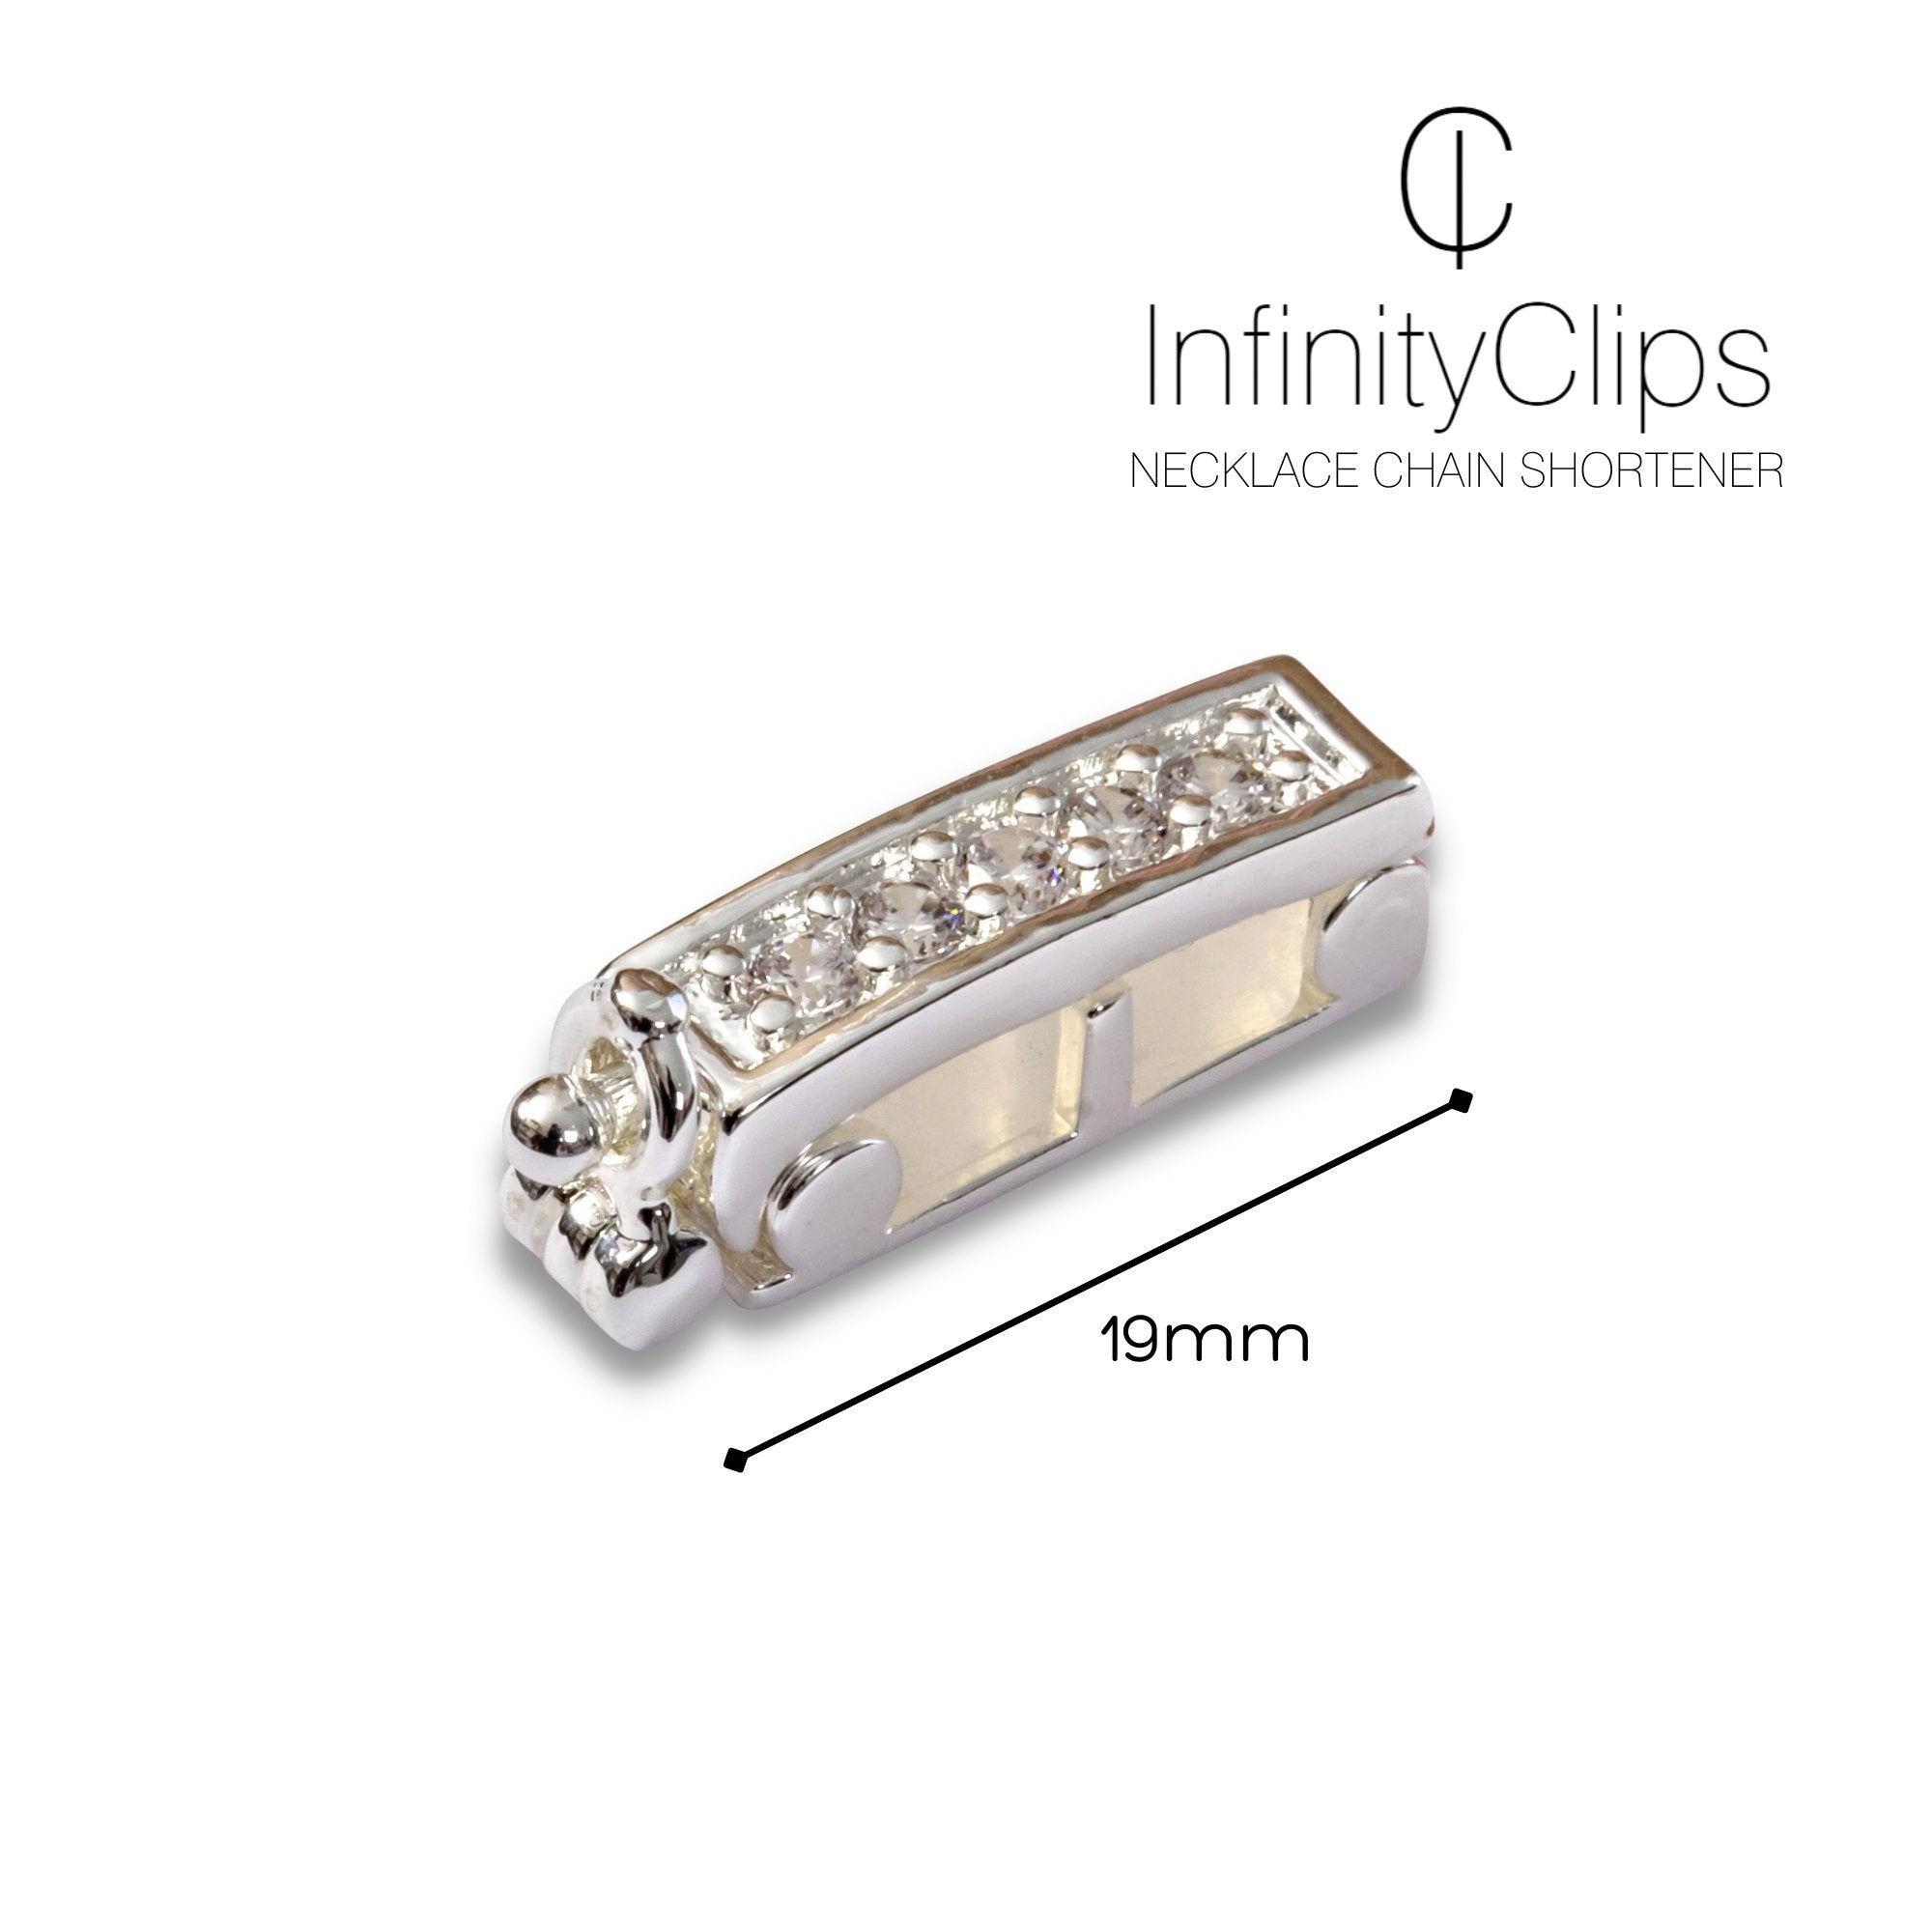 INFINITY CLIPS - Necklace Chain Shortener